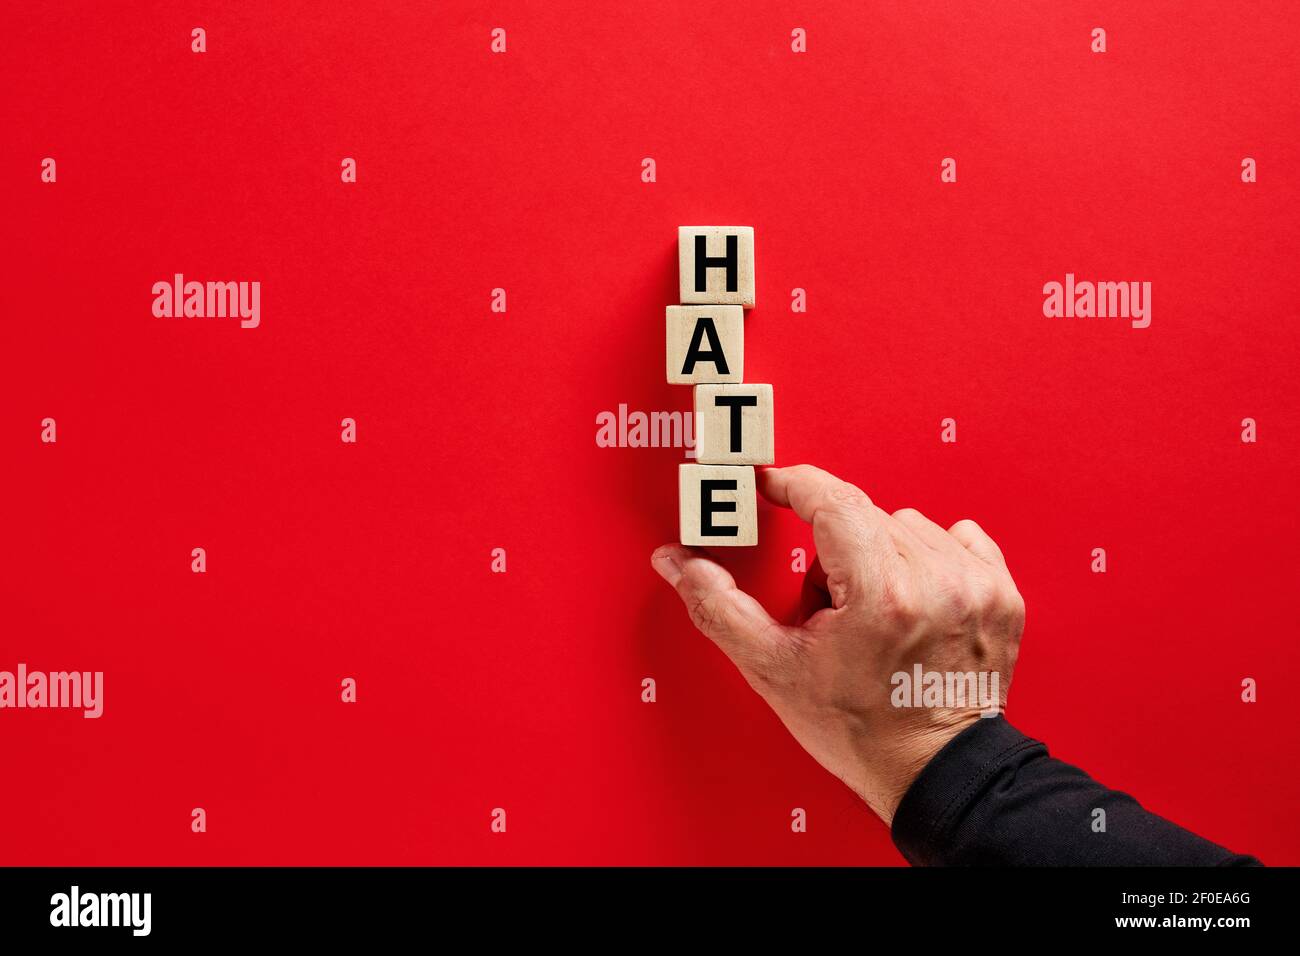 Male hand arranging the wooden blocks with the word hate on red background. Hate or hate crime concept. Stock Photo